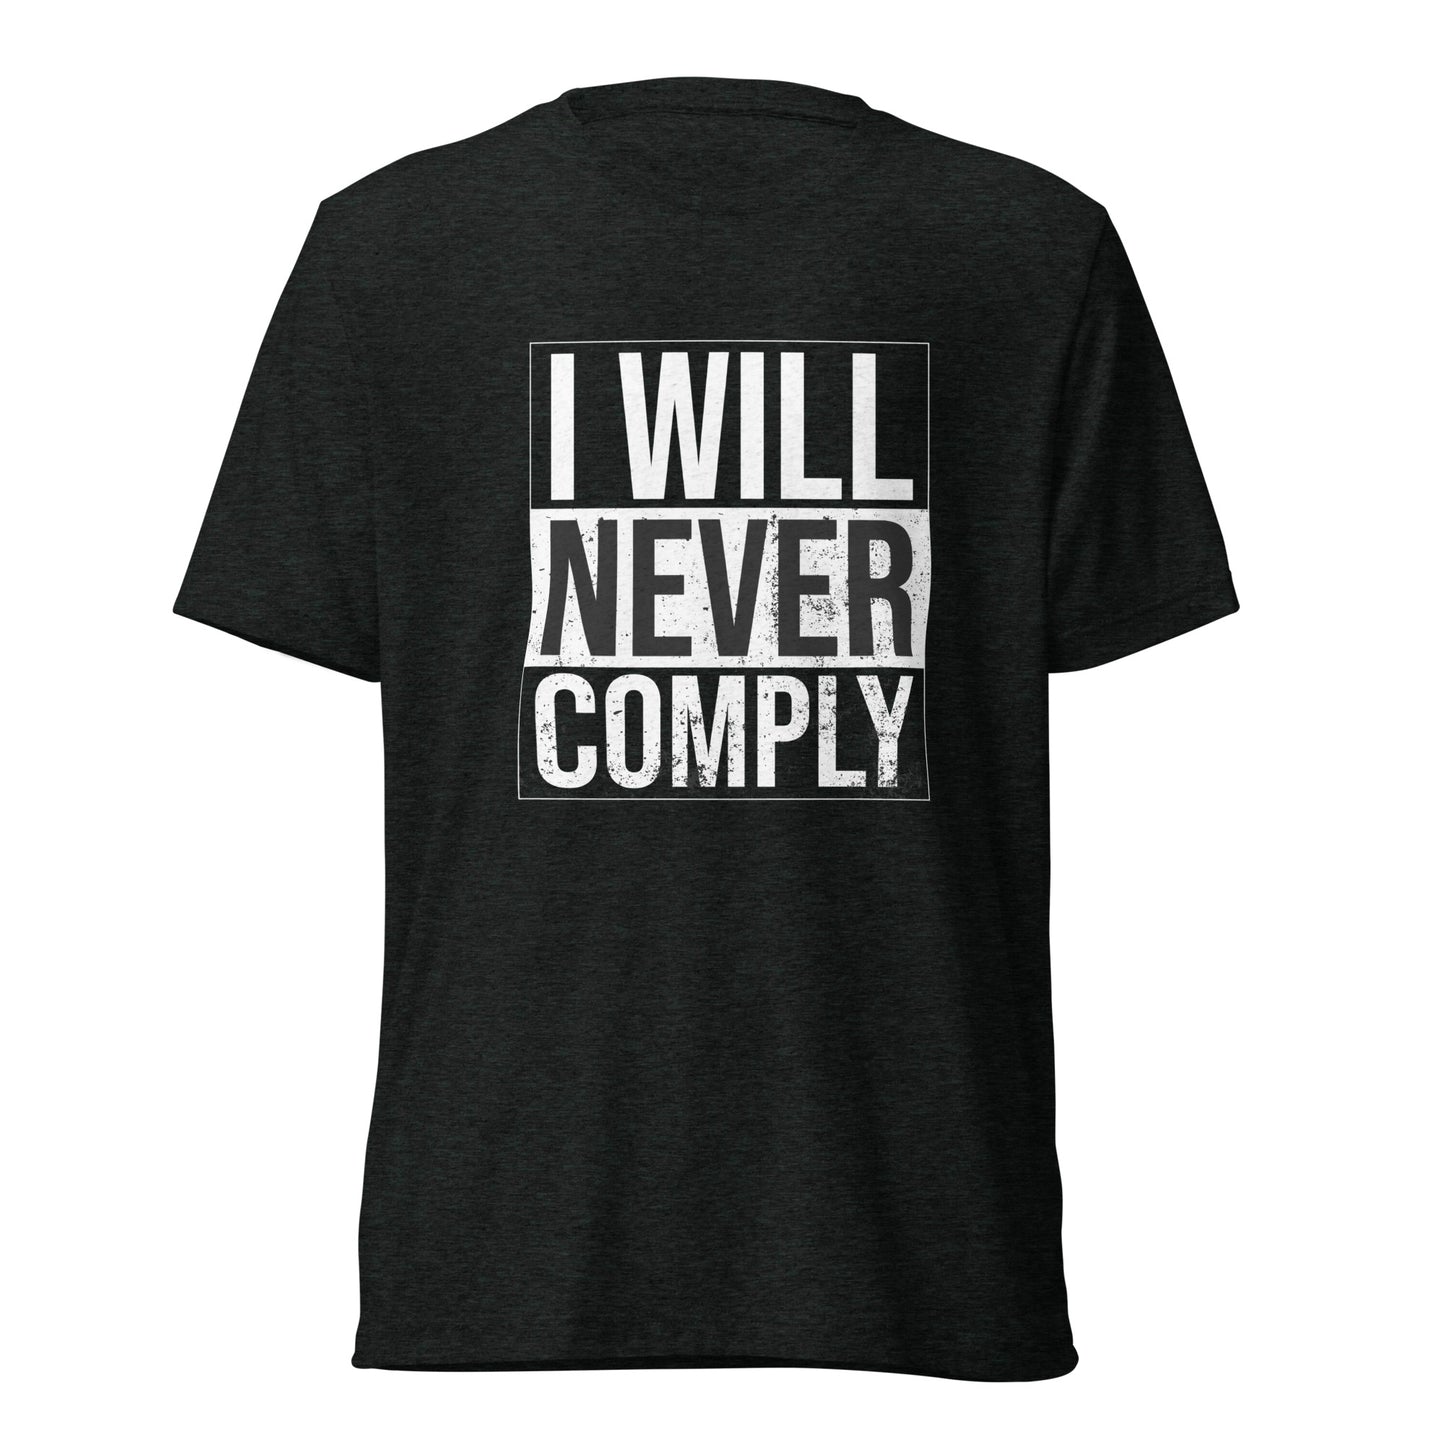 NEVER COMPLY Short sleeve t-shirt